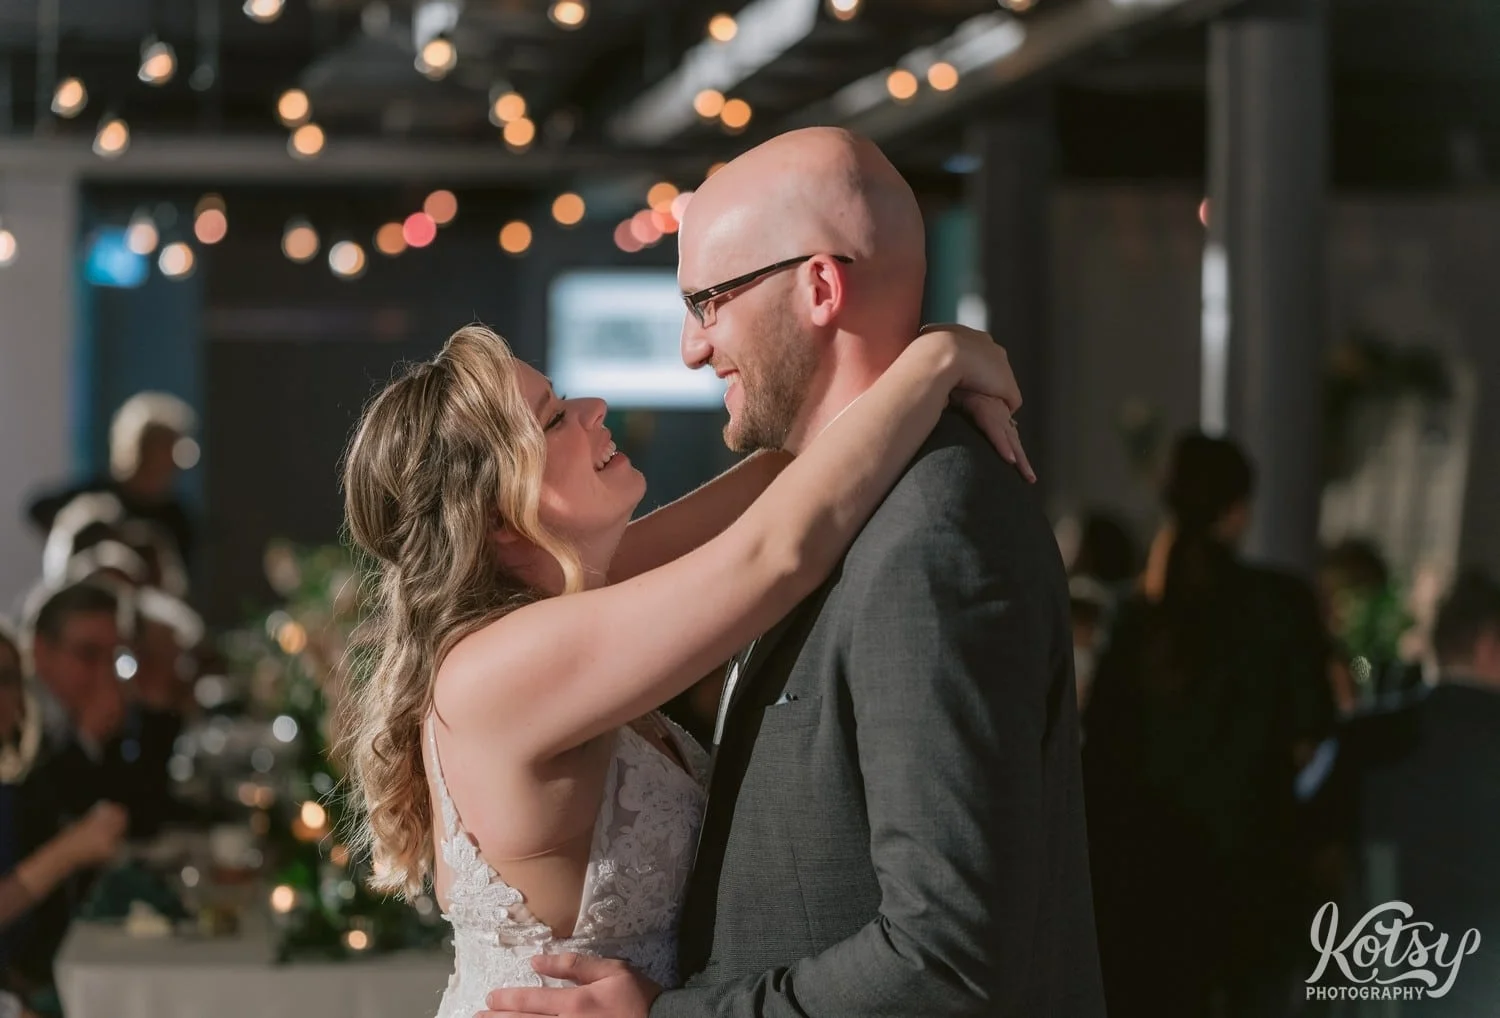 A really tight shot of a bride and white wedding gown and grooming gray suit looking at each other and smiling during their first dance at Second Floor Events wedding reception in Toronto, Canada.